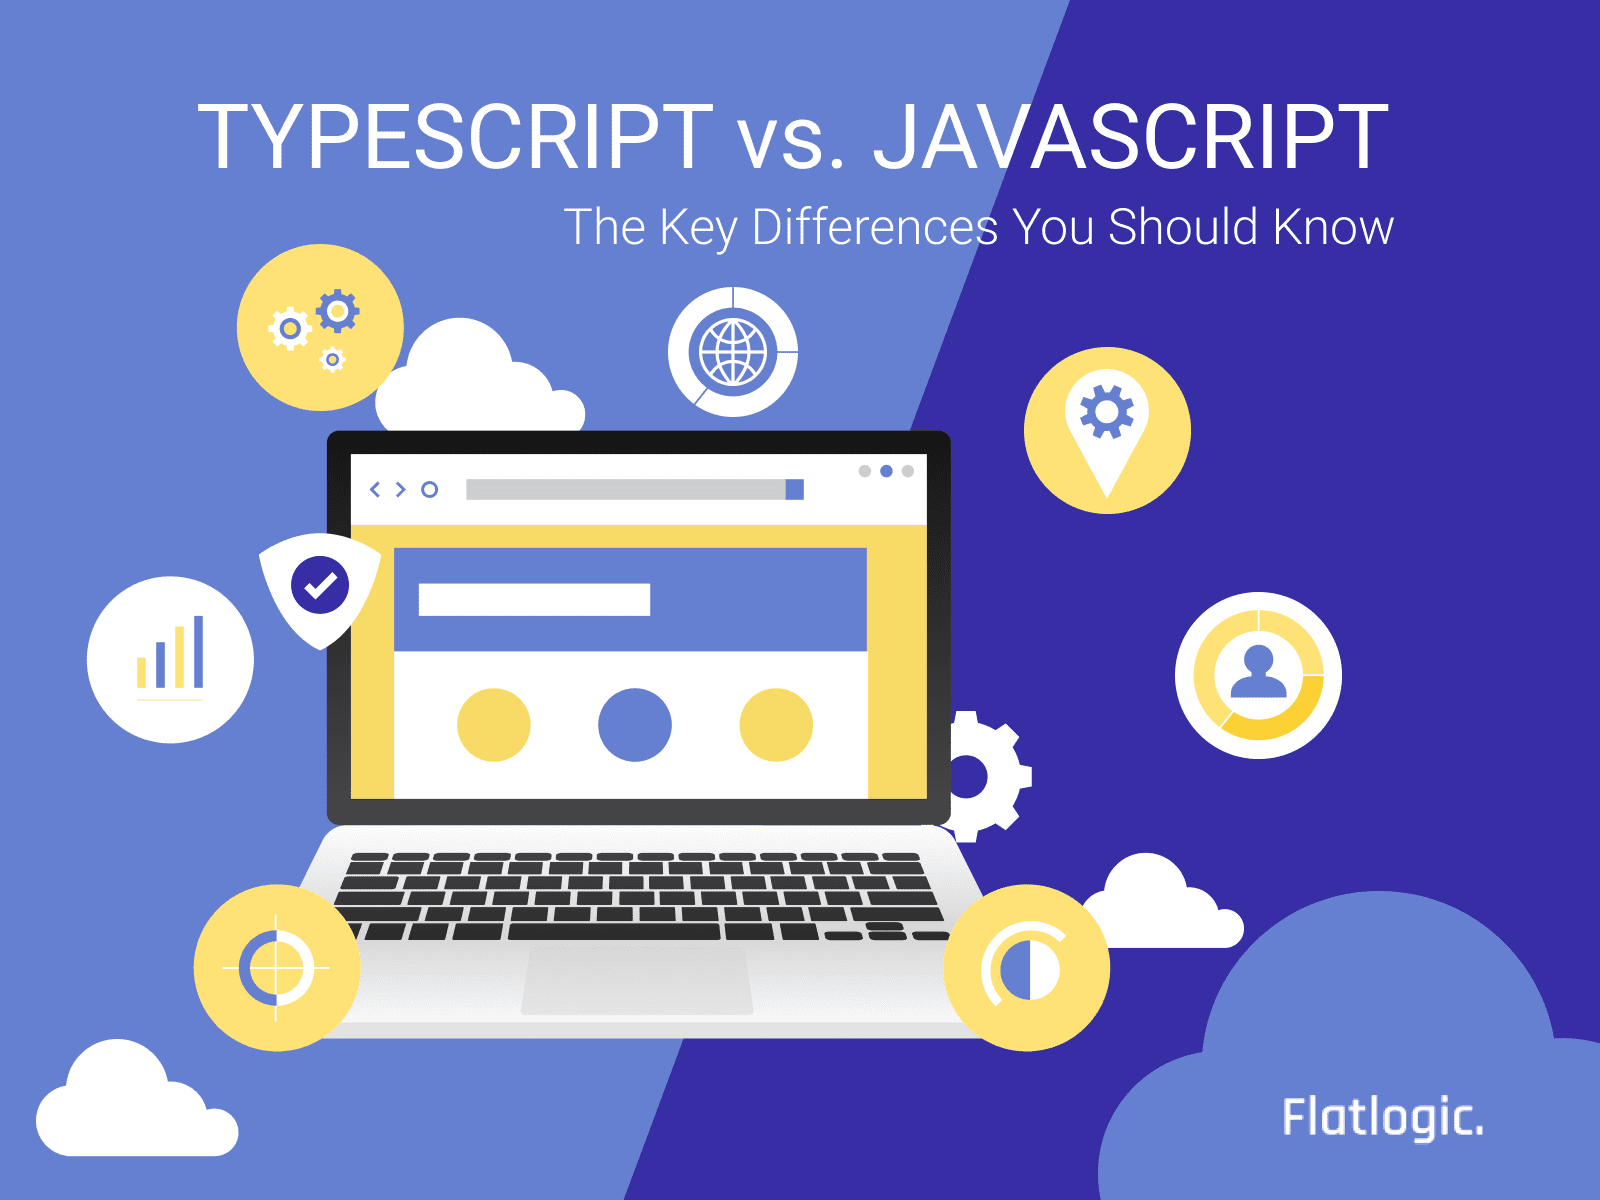 [Update] Typescript vs. Javascript: The Key Differences You Should Know in 2023